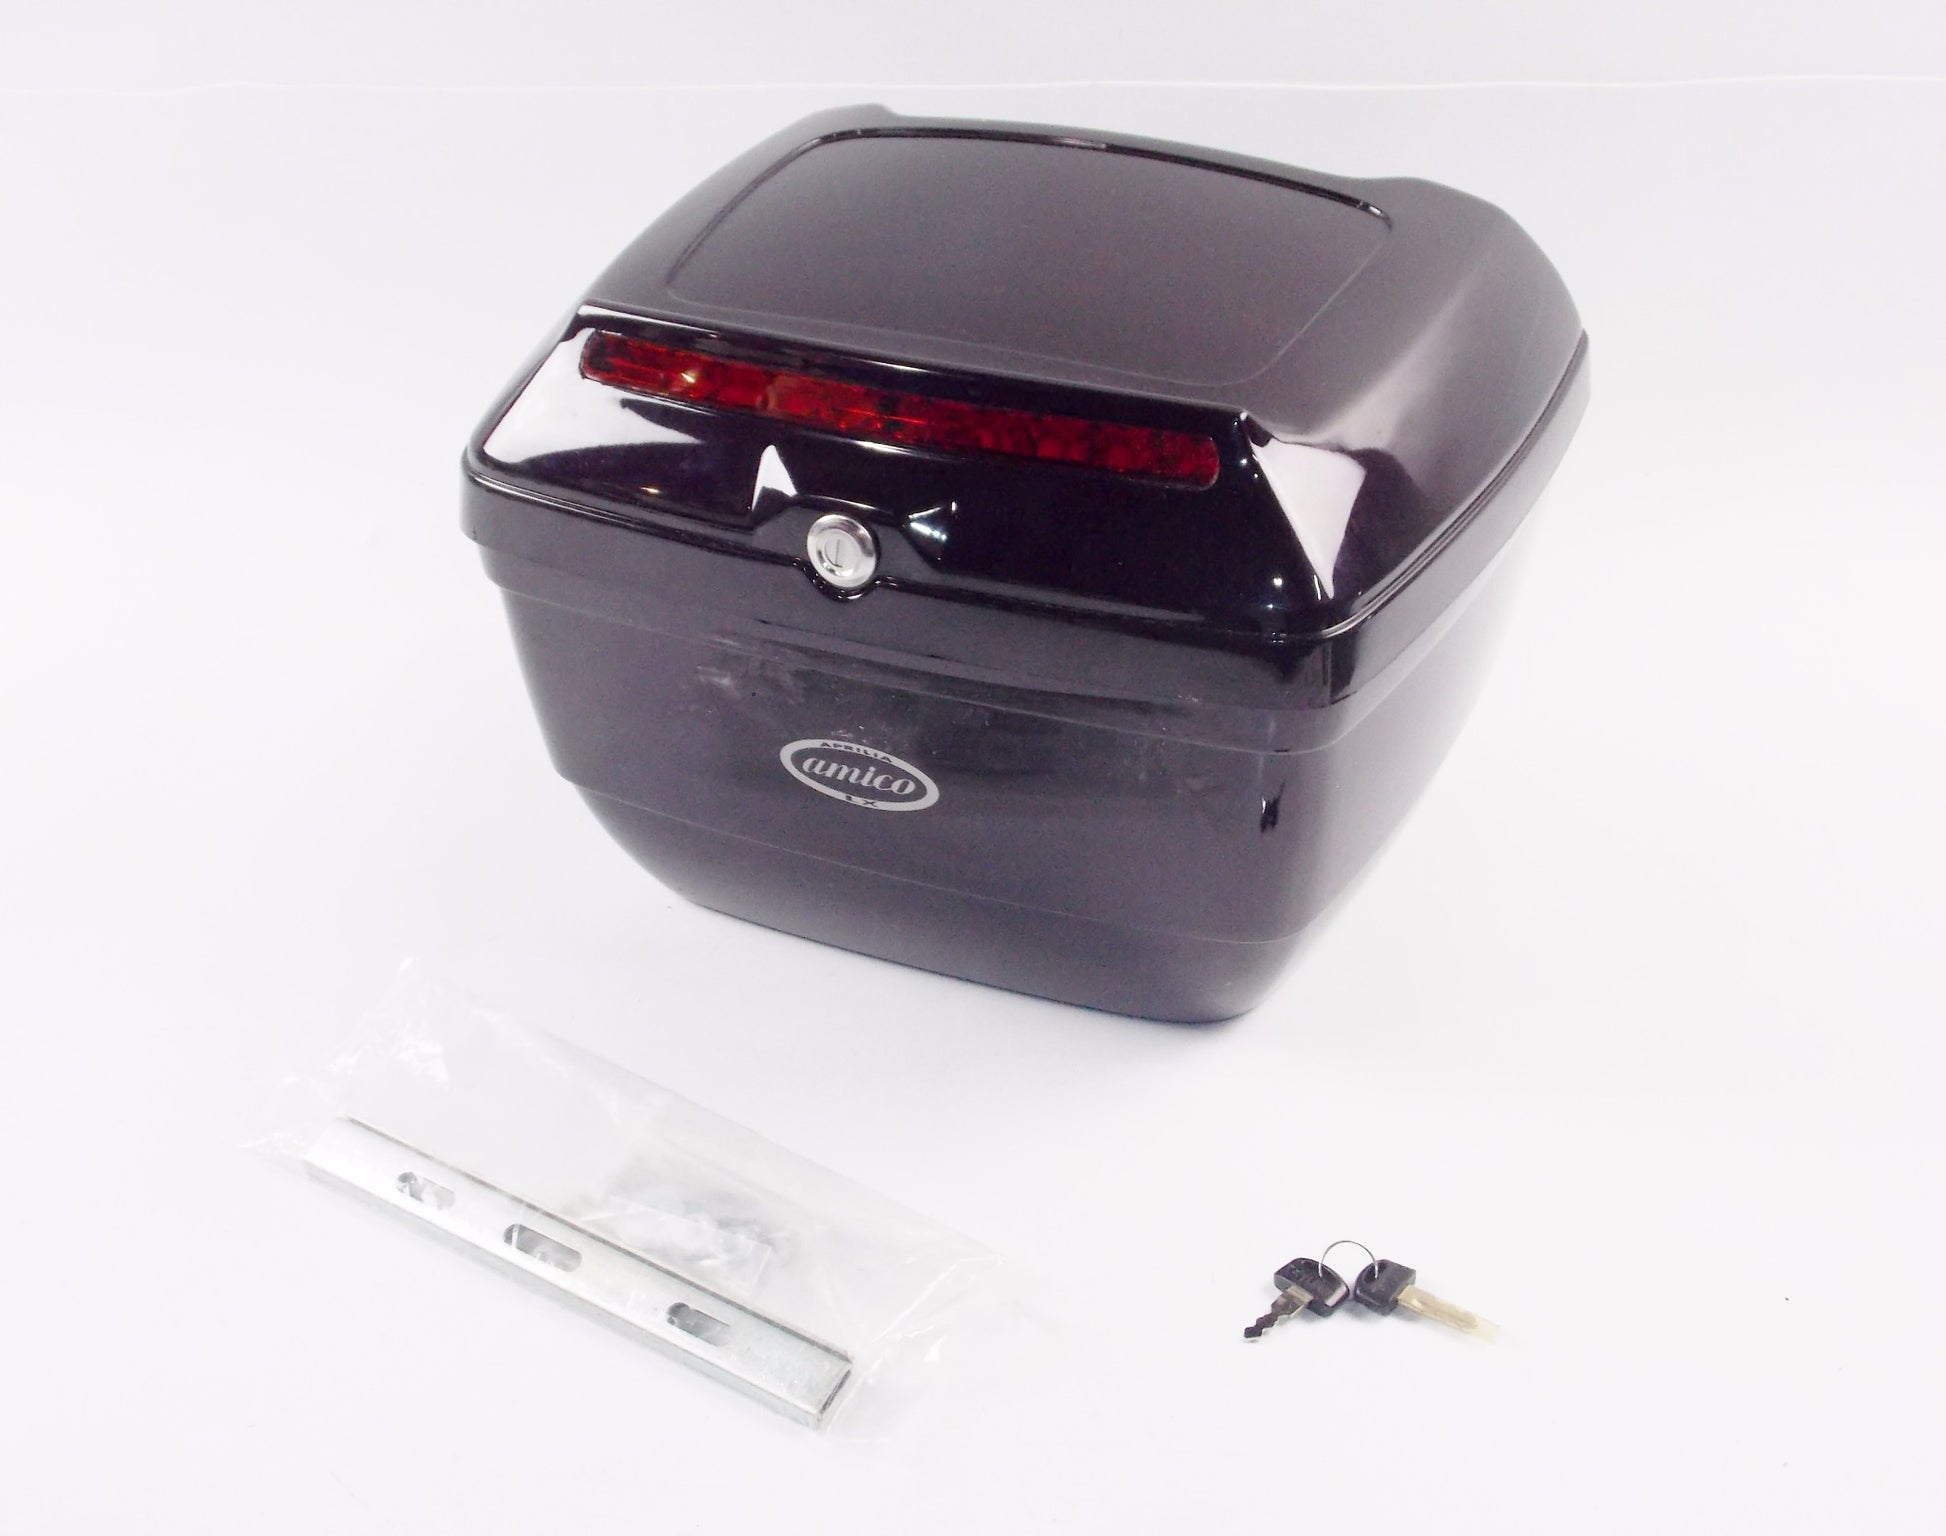 SCOOTER MOPED PURPLE APRILIA REAR TOP CASE HOLDER LUGGAGE WITH KEY 13.5x13.5x10 - MotoRaider